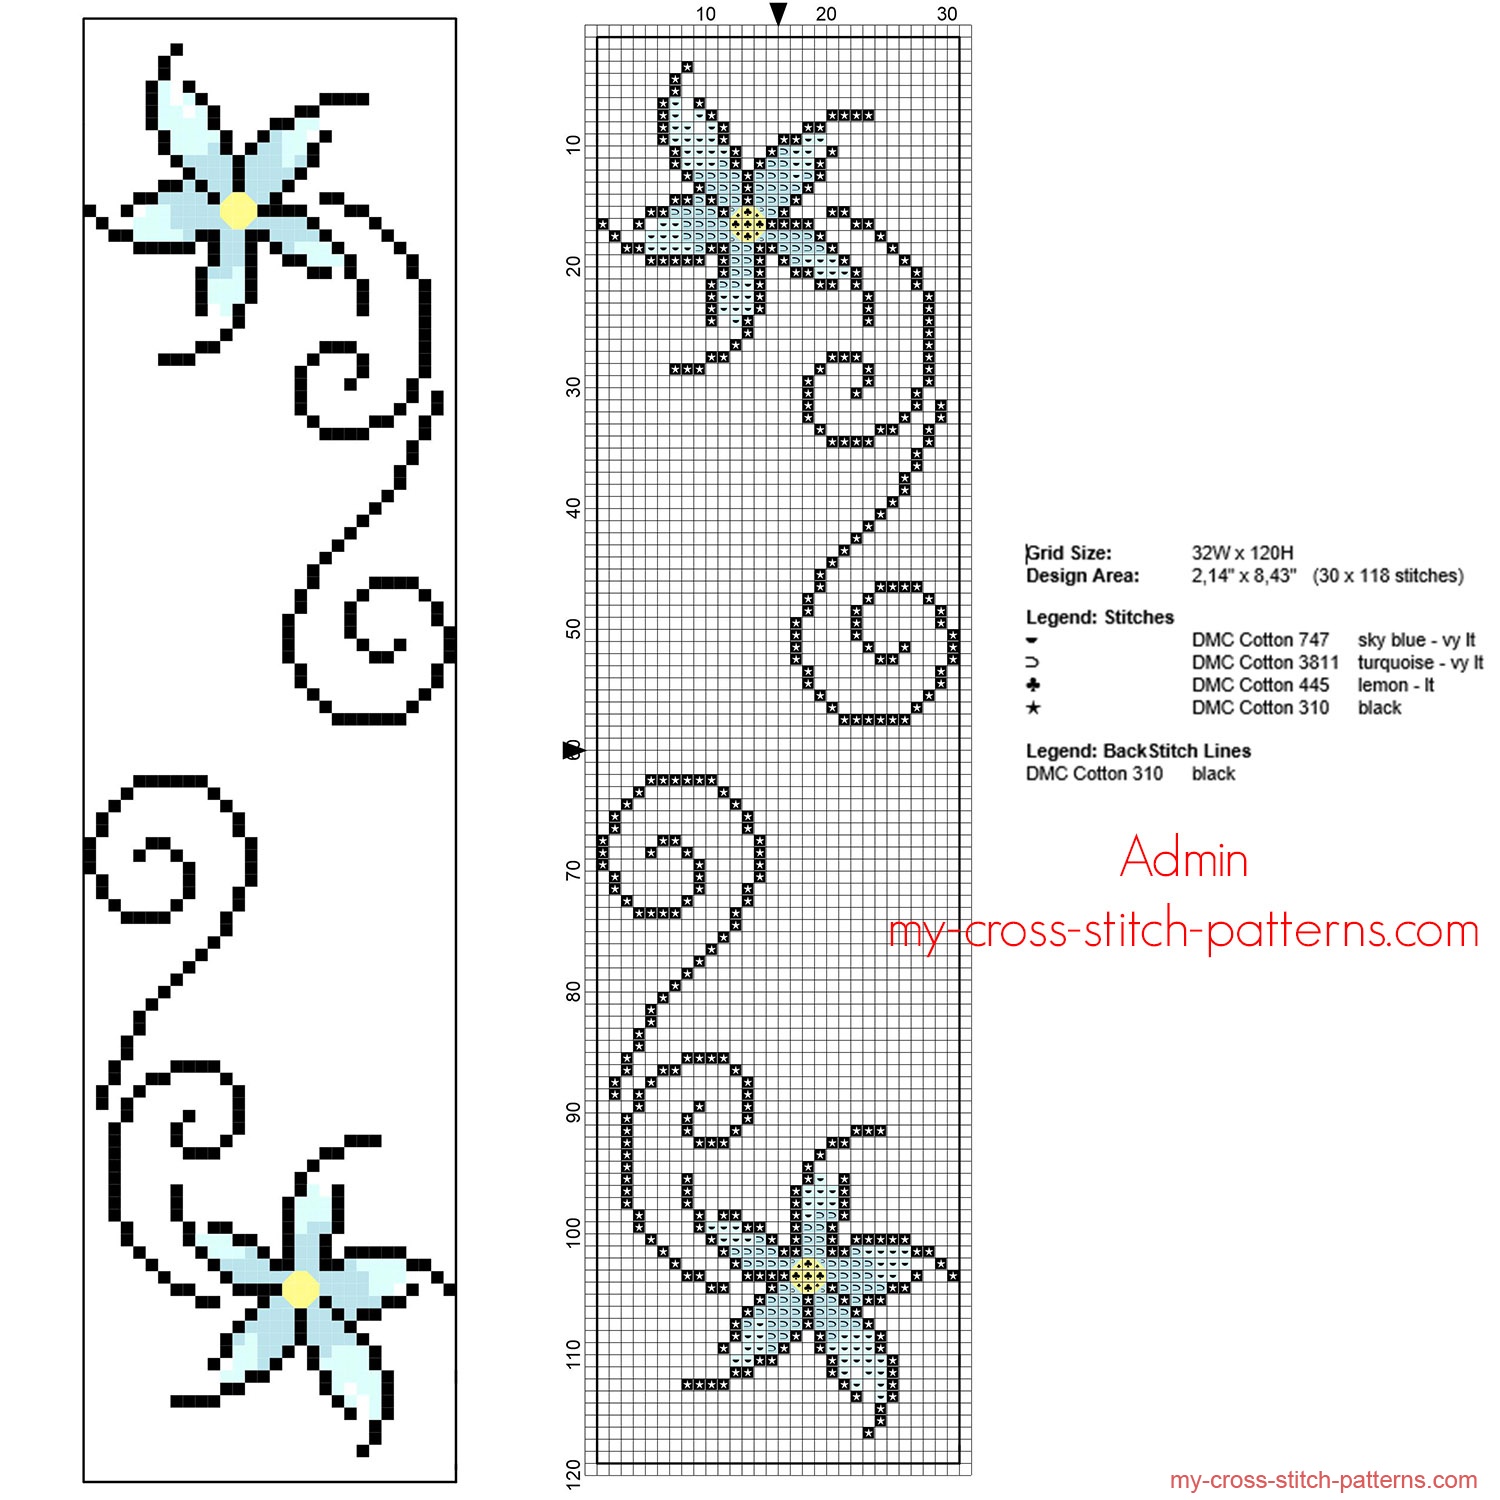 floral_cross_stitch_bookmark_with_small_stylised_light_blue_flowers